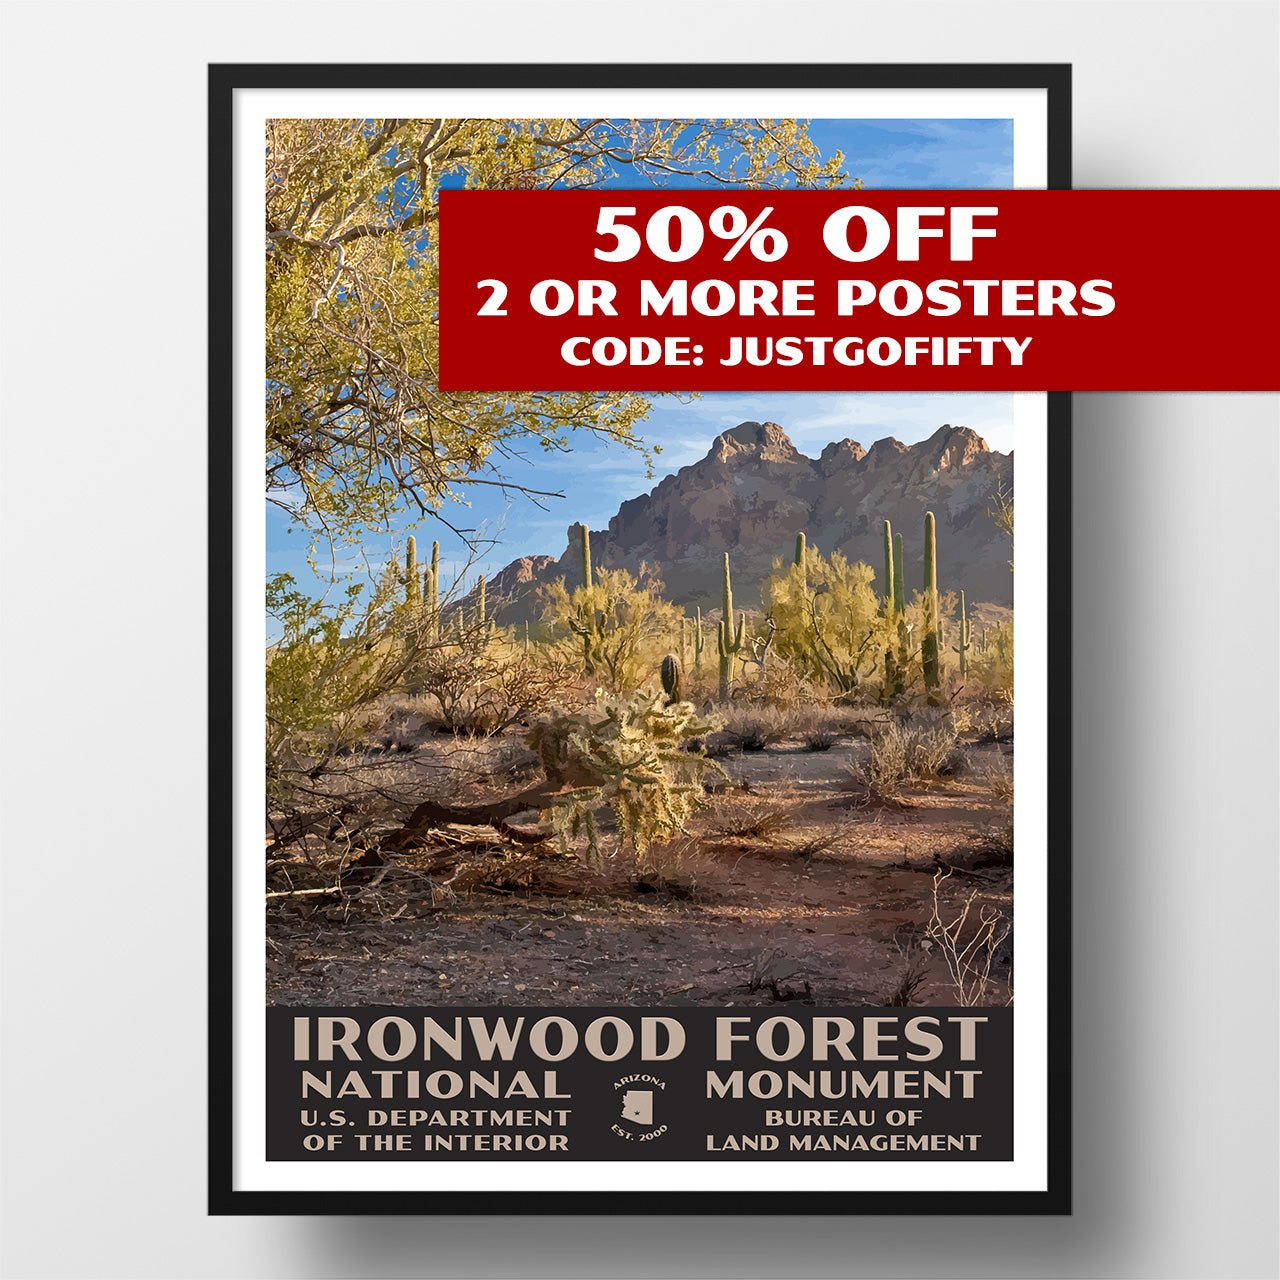 Ironwood Forest National Monument poster